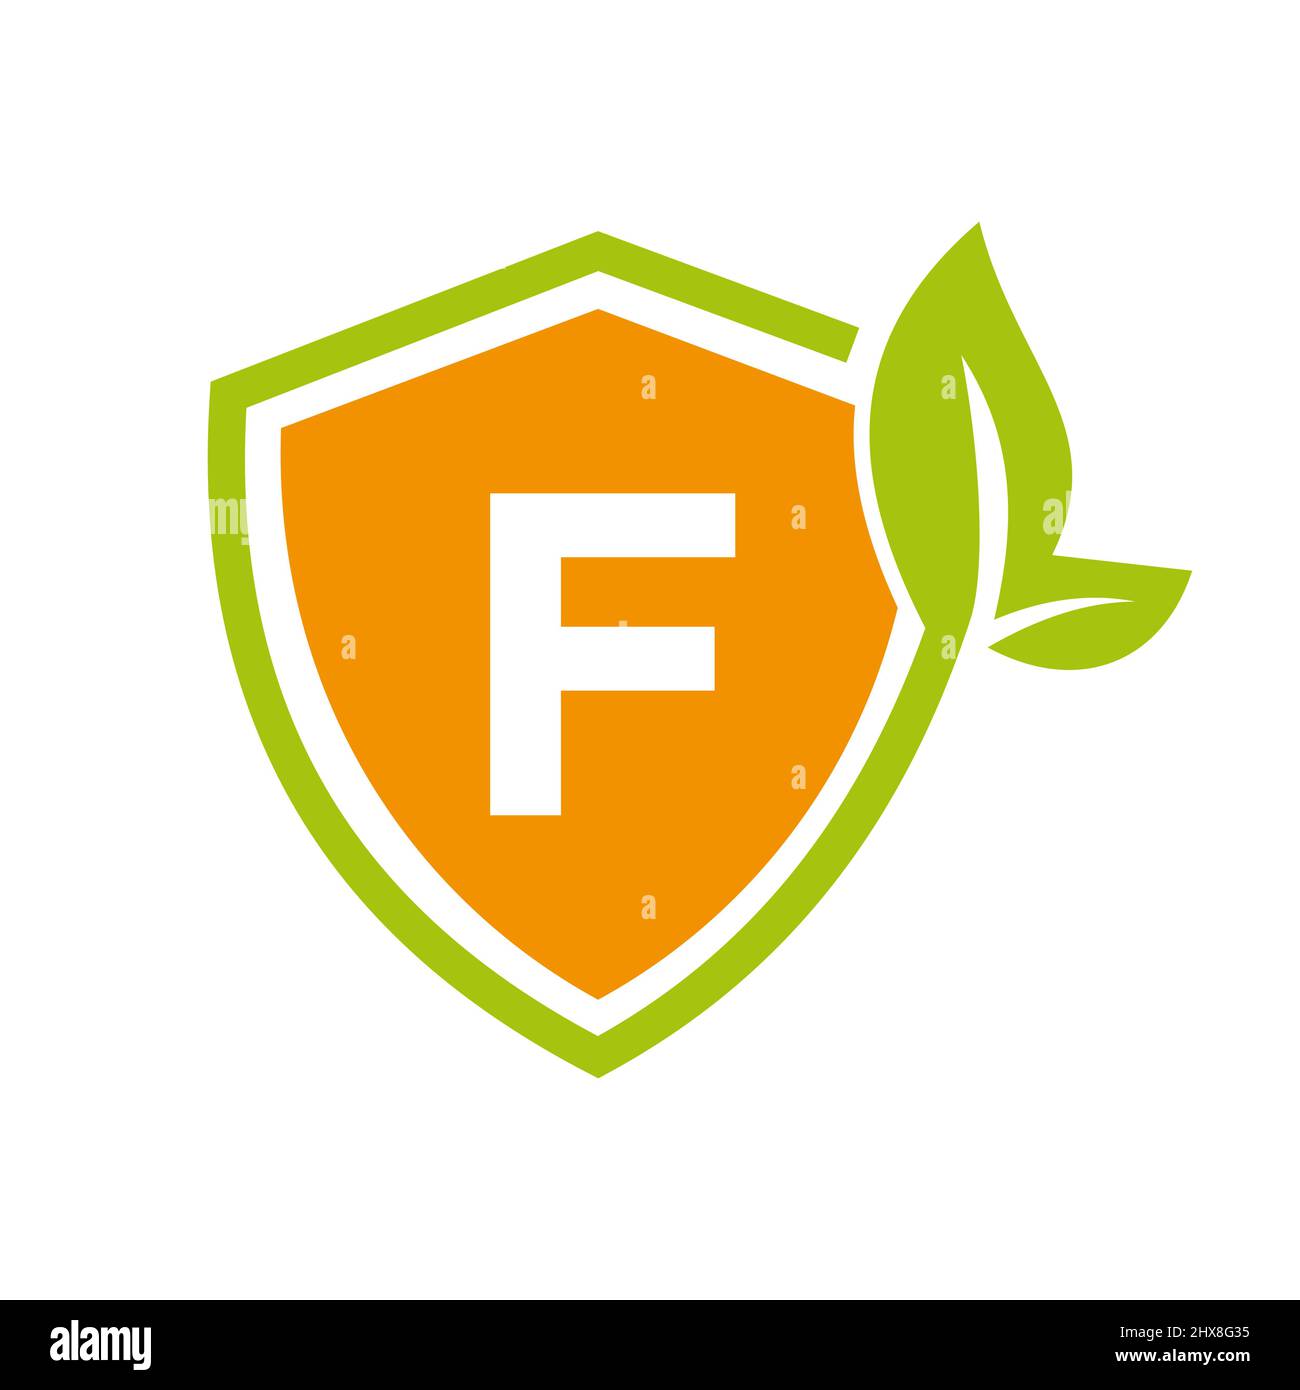 Eco Leaf Agriculture Logo On Letter F Vector Template. Eco Sign, Agronomy, Wheat Farm, Rural Country Farming, Natural Harvest Concept Stock Vector